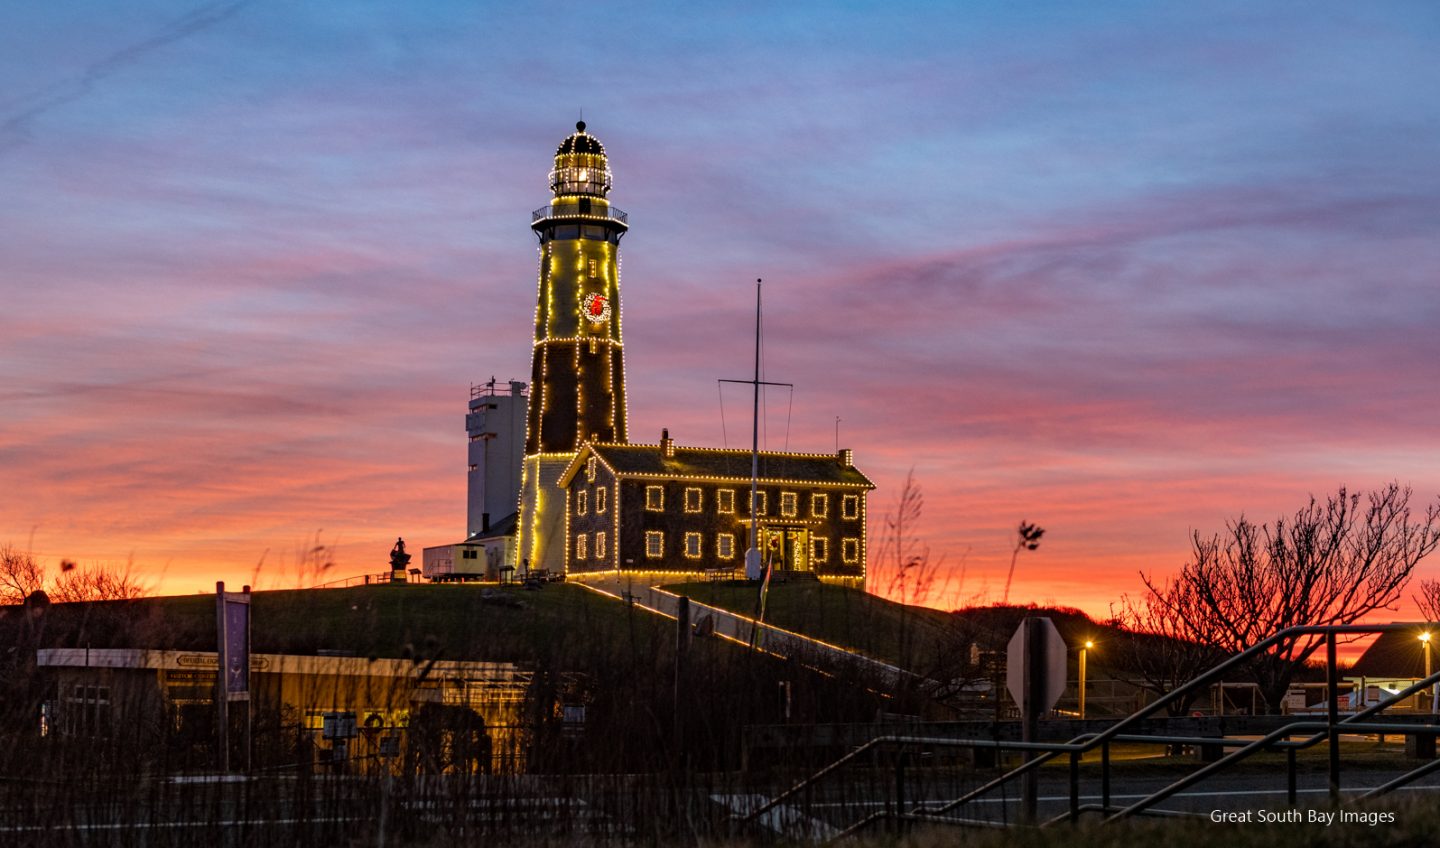 Montauk Lighthouse with holiday lighting and colorful sunset.